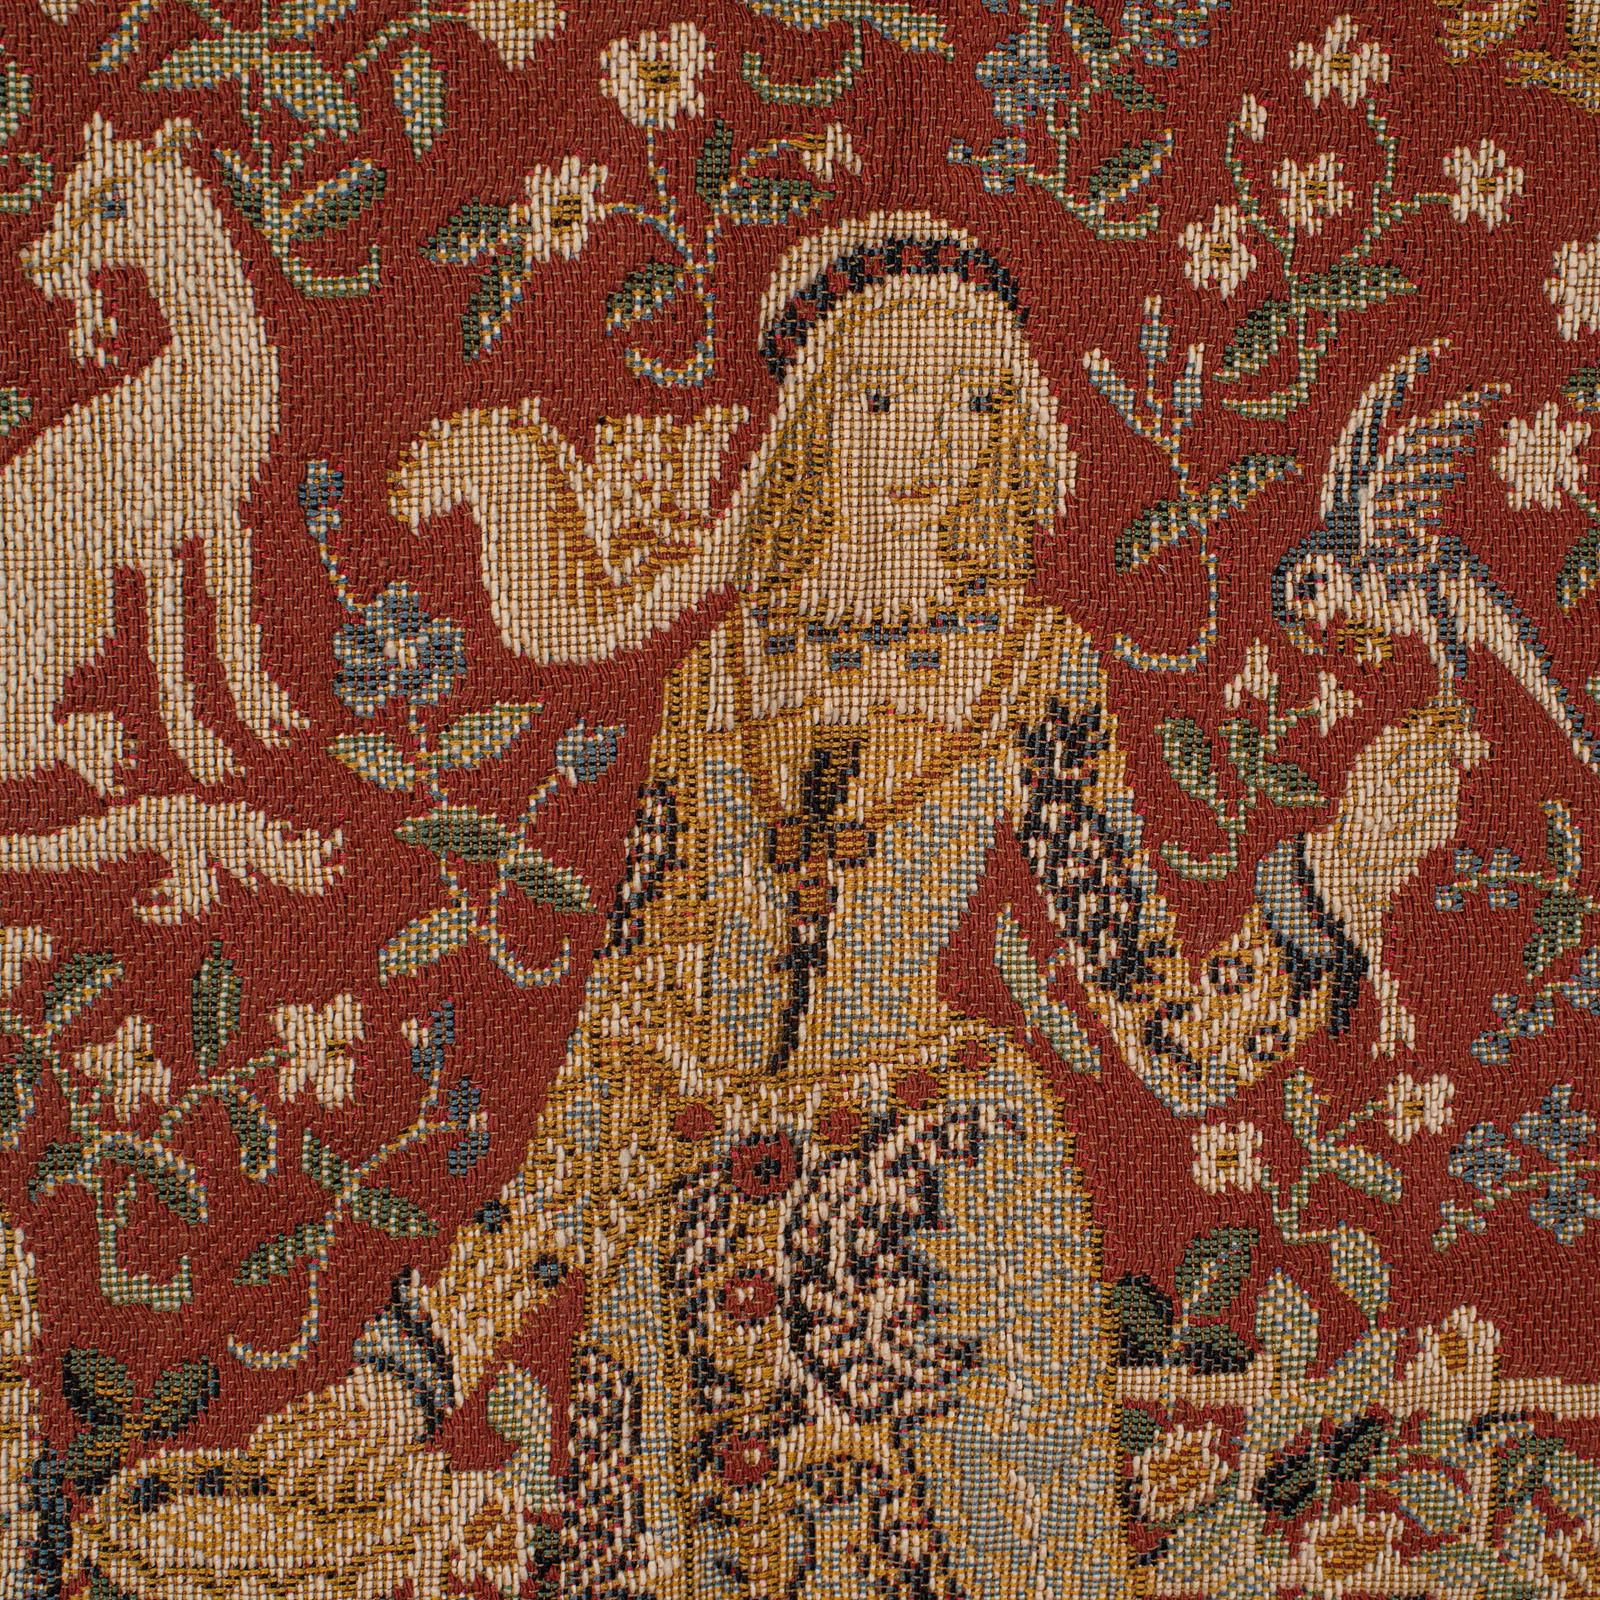 20th Century Vintage Tapestry, French, Needlepoint, the Lady and the Unicorn, the Taste, 1980